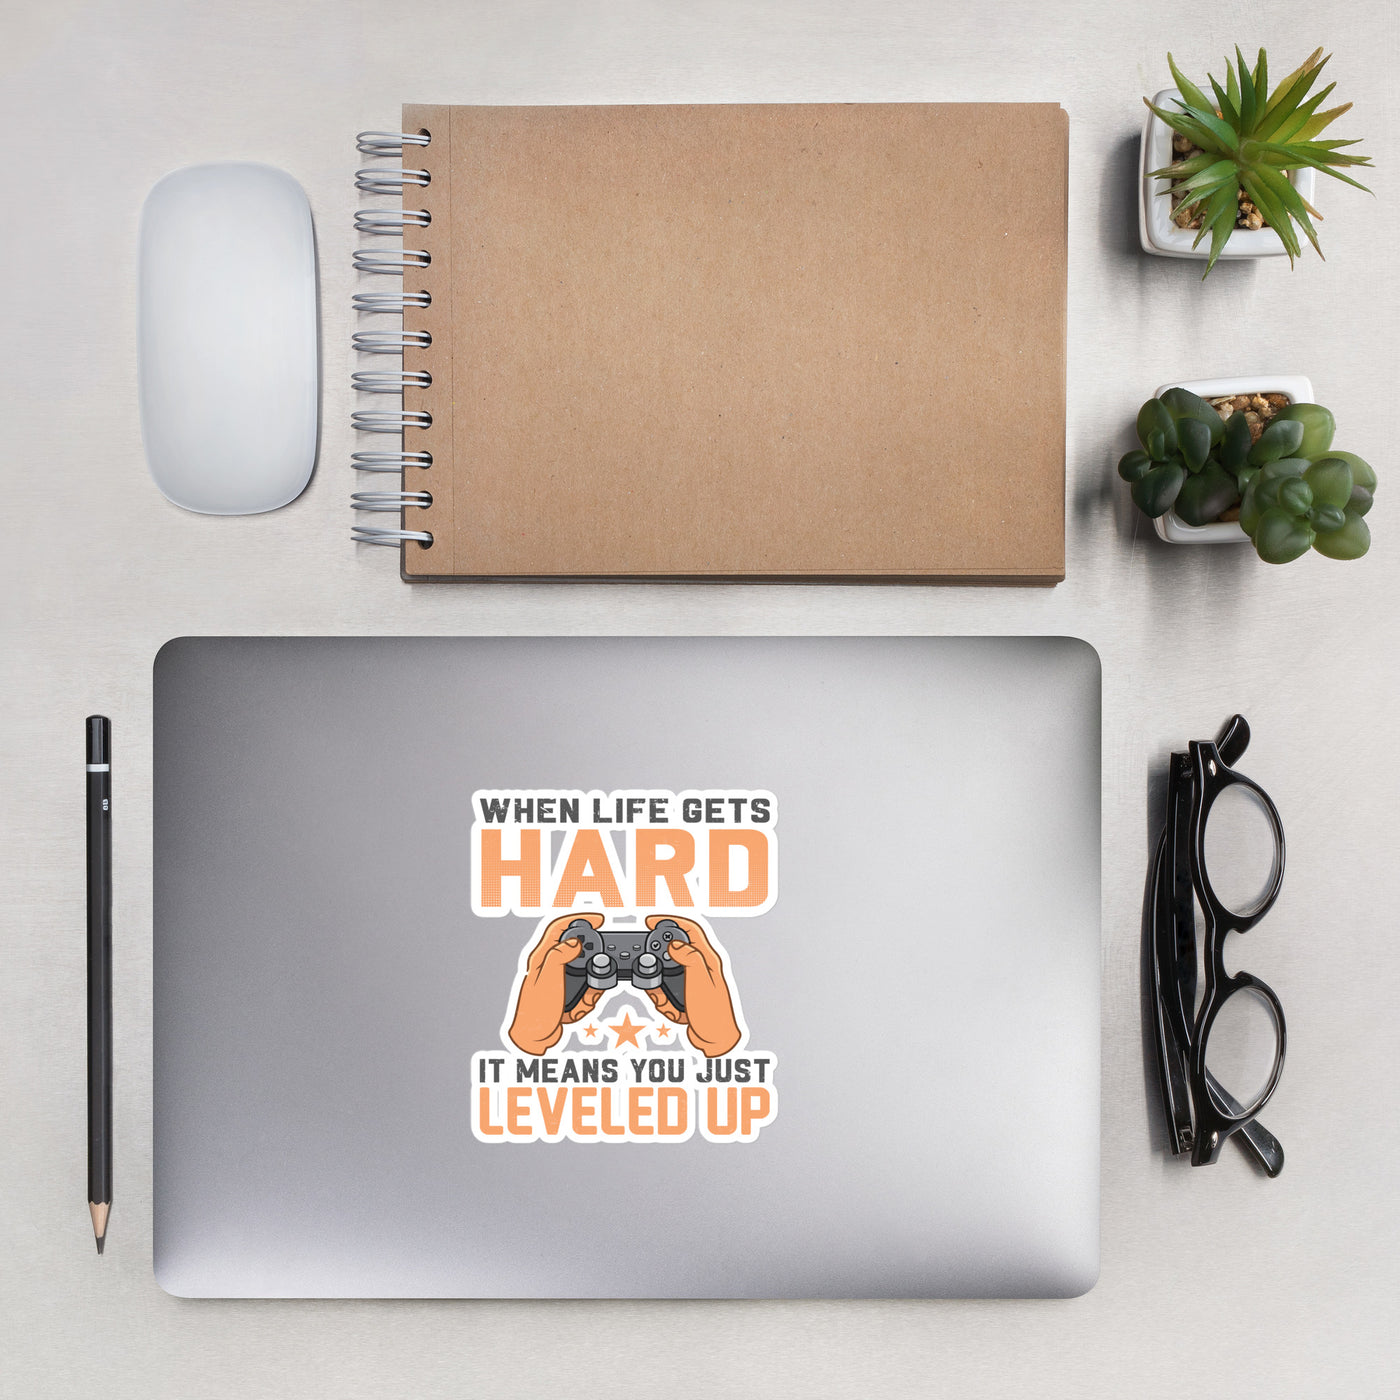 When life Gets hard, it Means you are leveled up - Bubble-free stickers